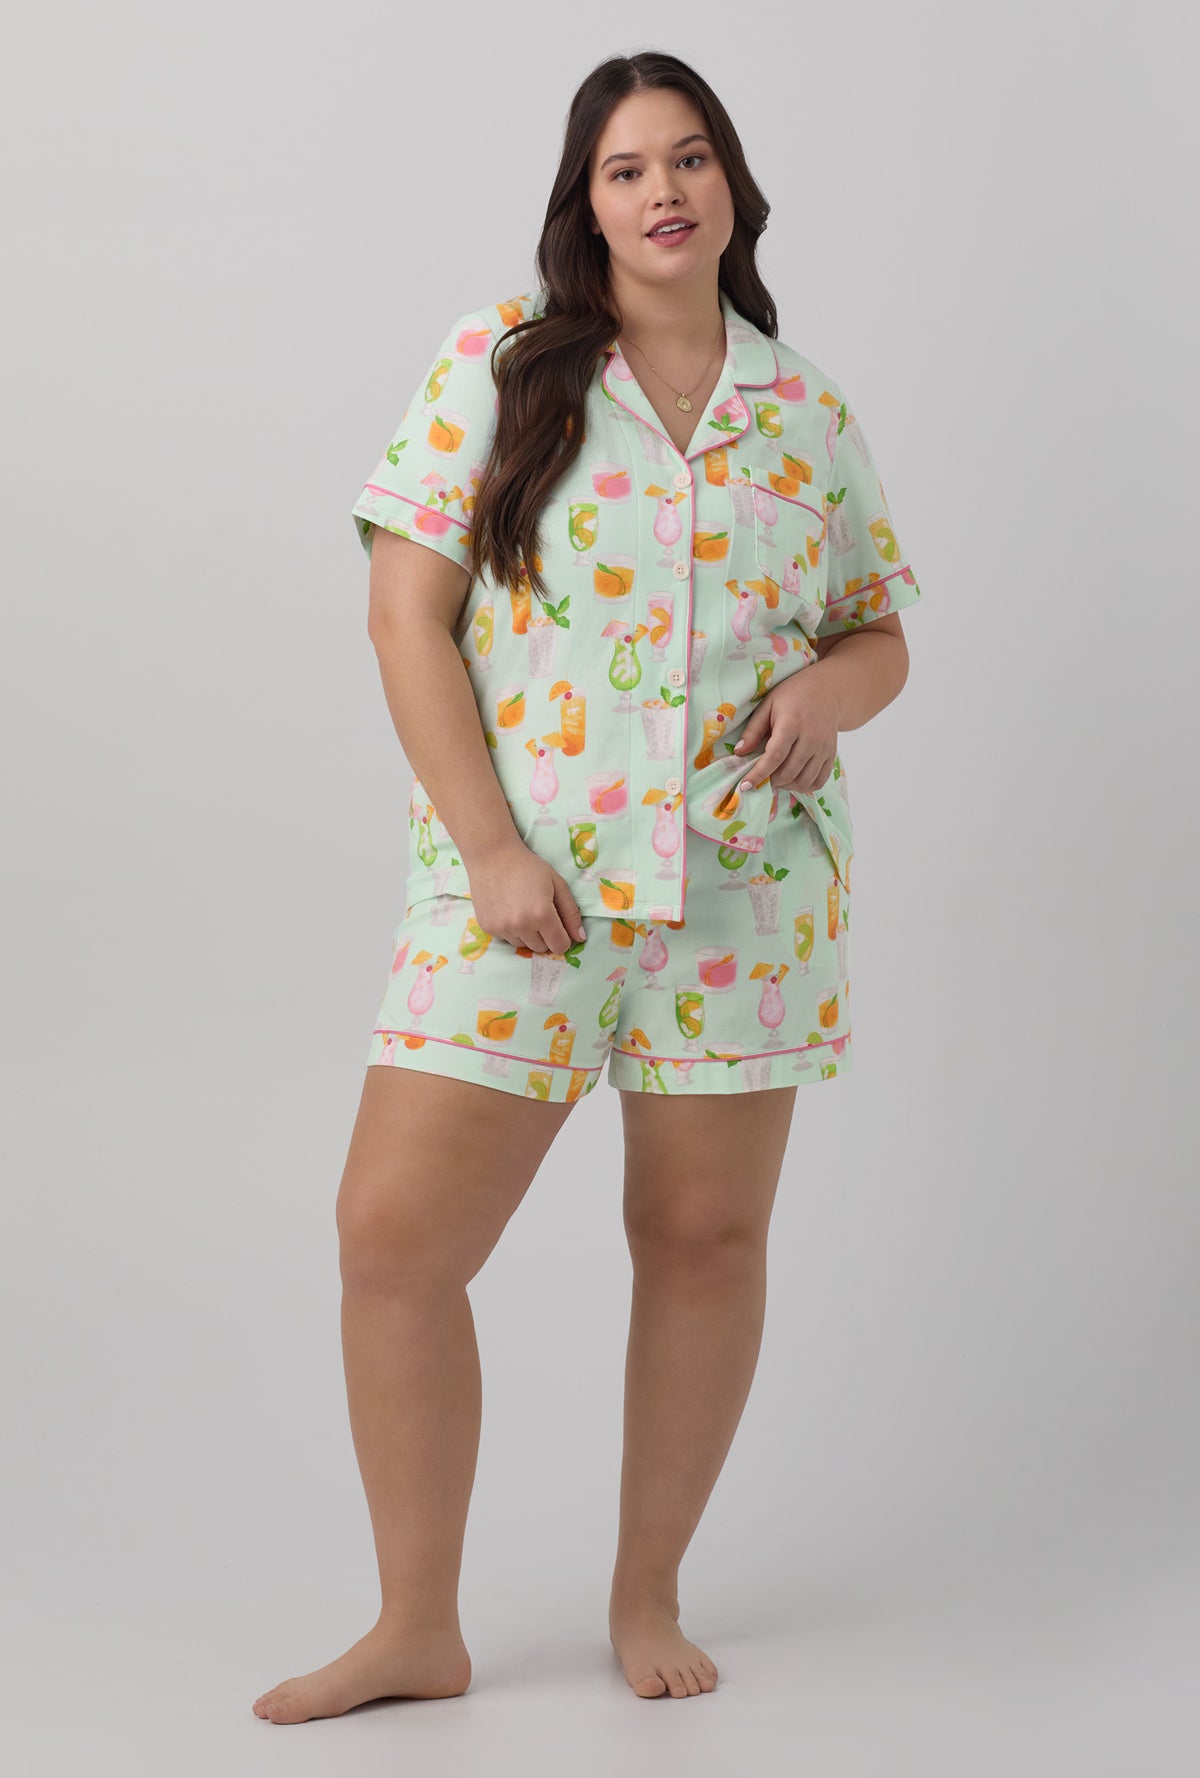 A lady wearing Short Sleeve Classic Shorty Stretch Jersey PJ Set with summer sips print